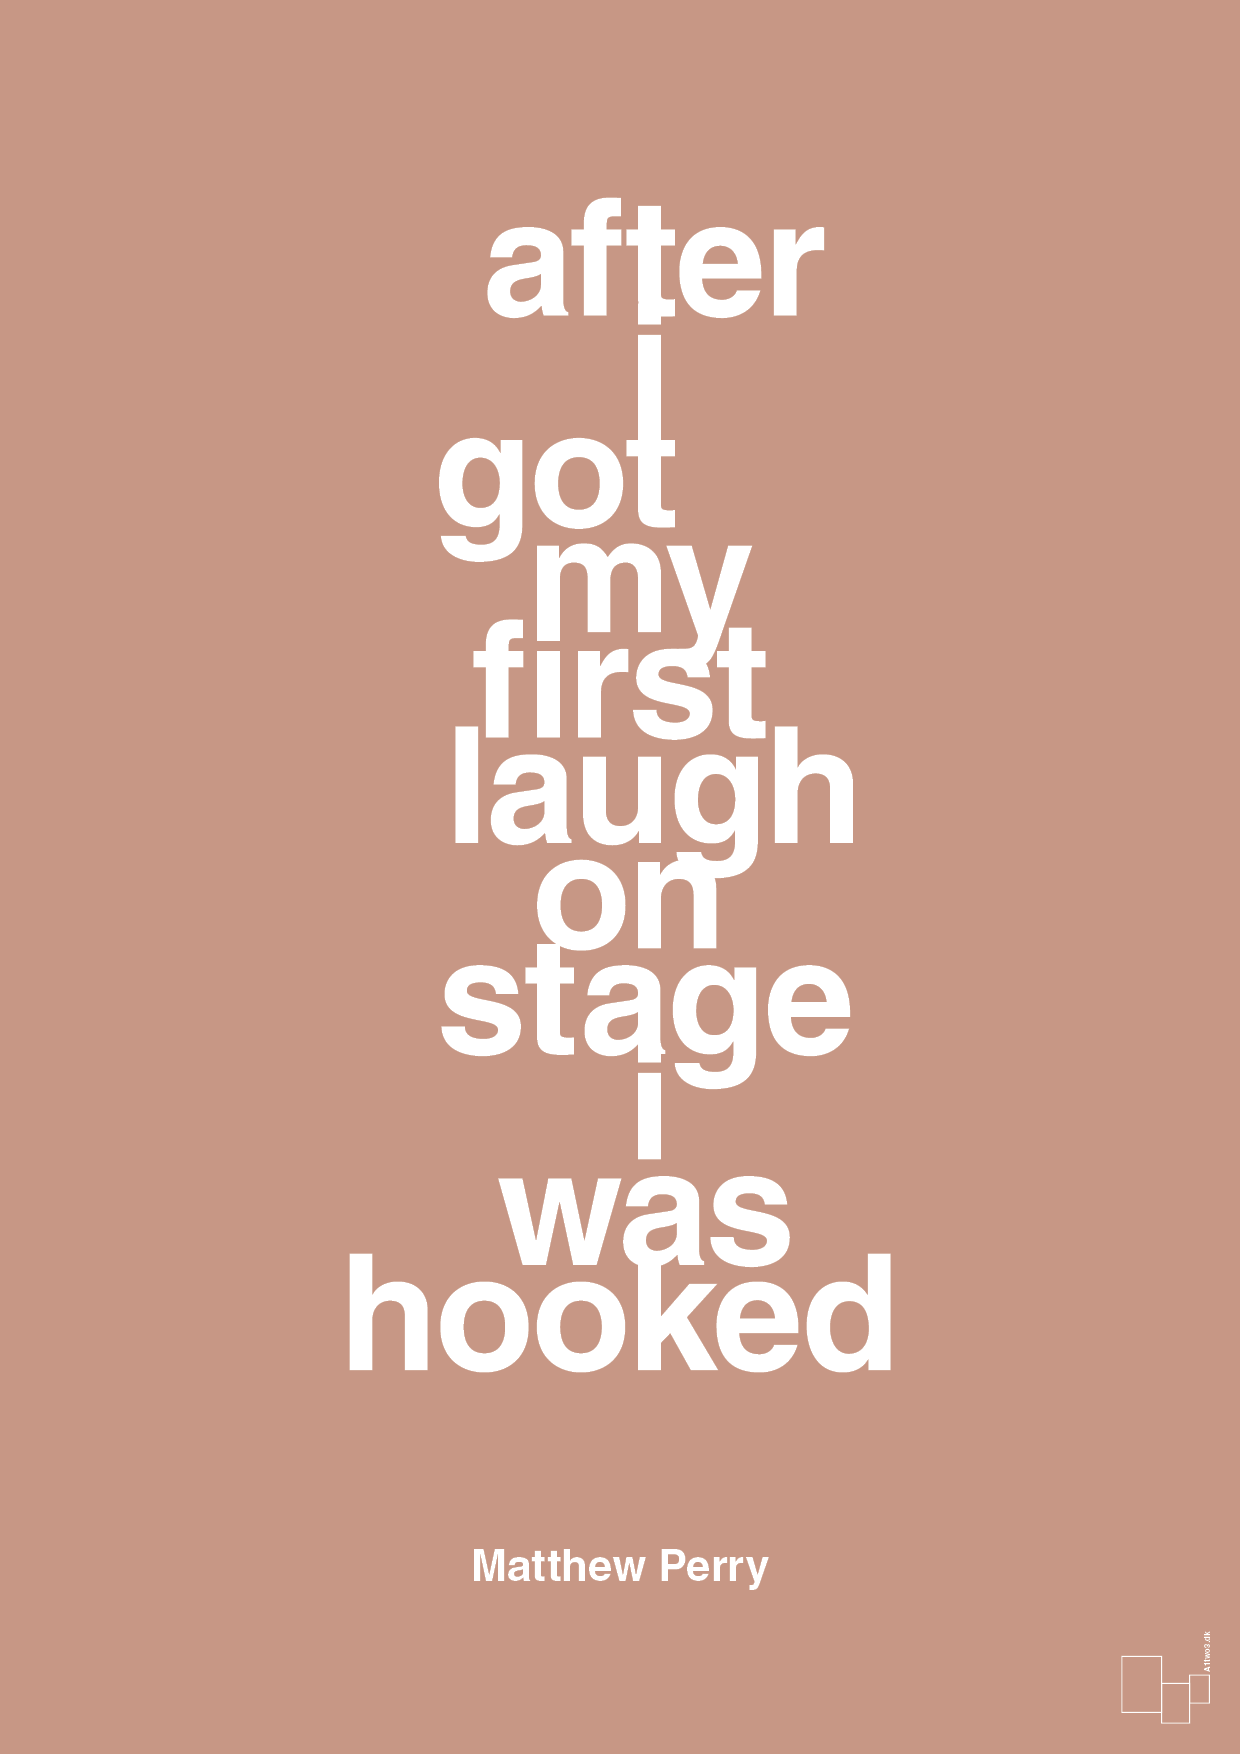 after i got my first laugh on stage i was hooked - Plakat med Citater i Powder